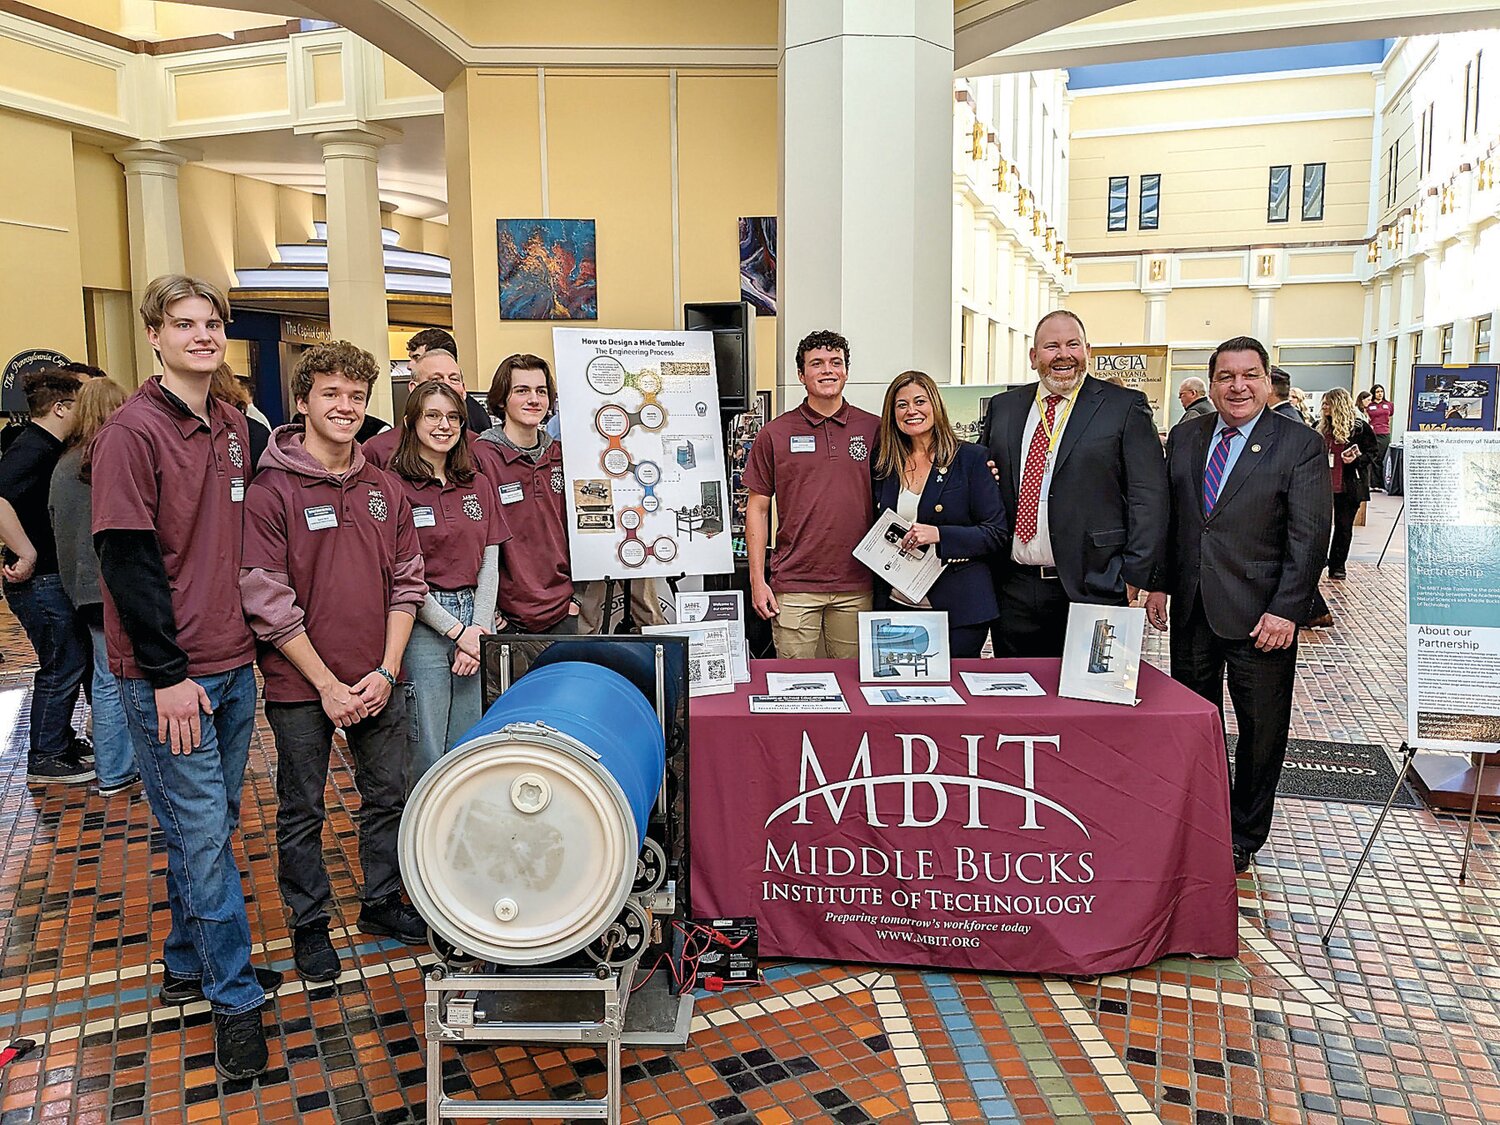 Middle Bucks Institute of Technology students recently brought their new invention, a collapsible hide tumbler, to Harrisburg. Hide tumbling is an important process in preserving a wide selection of bird specimens for research.